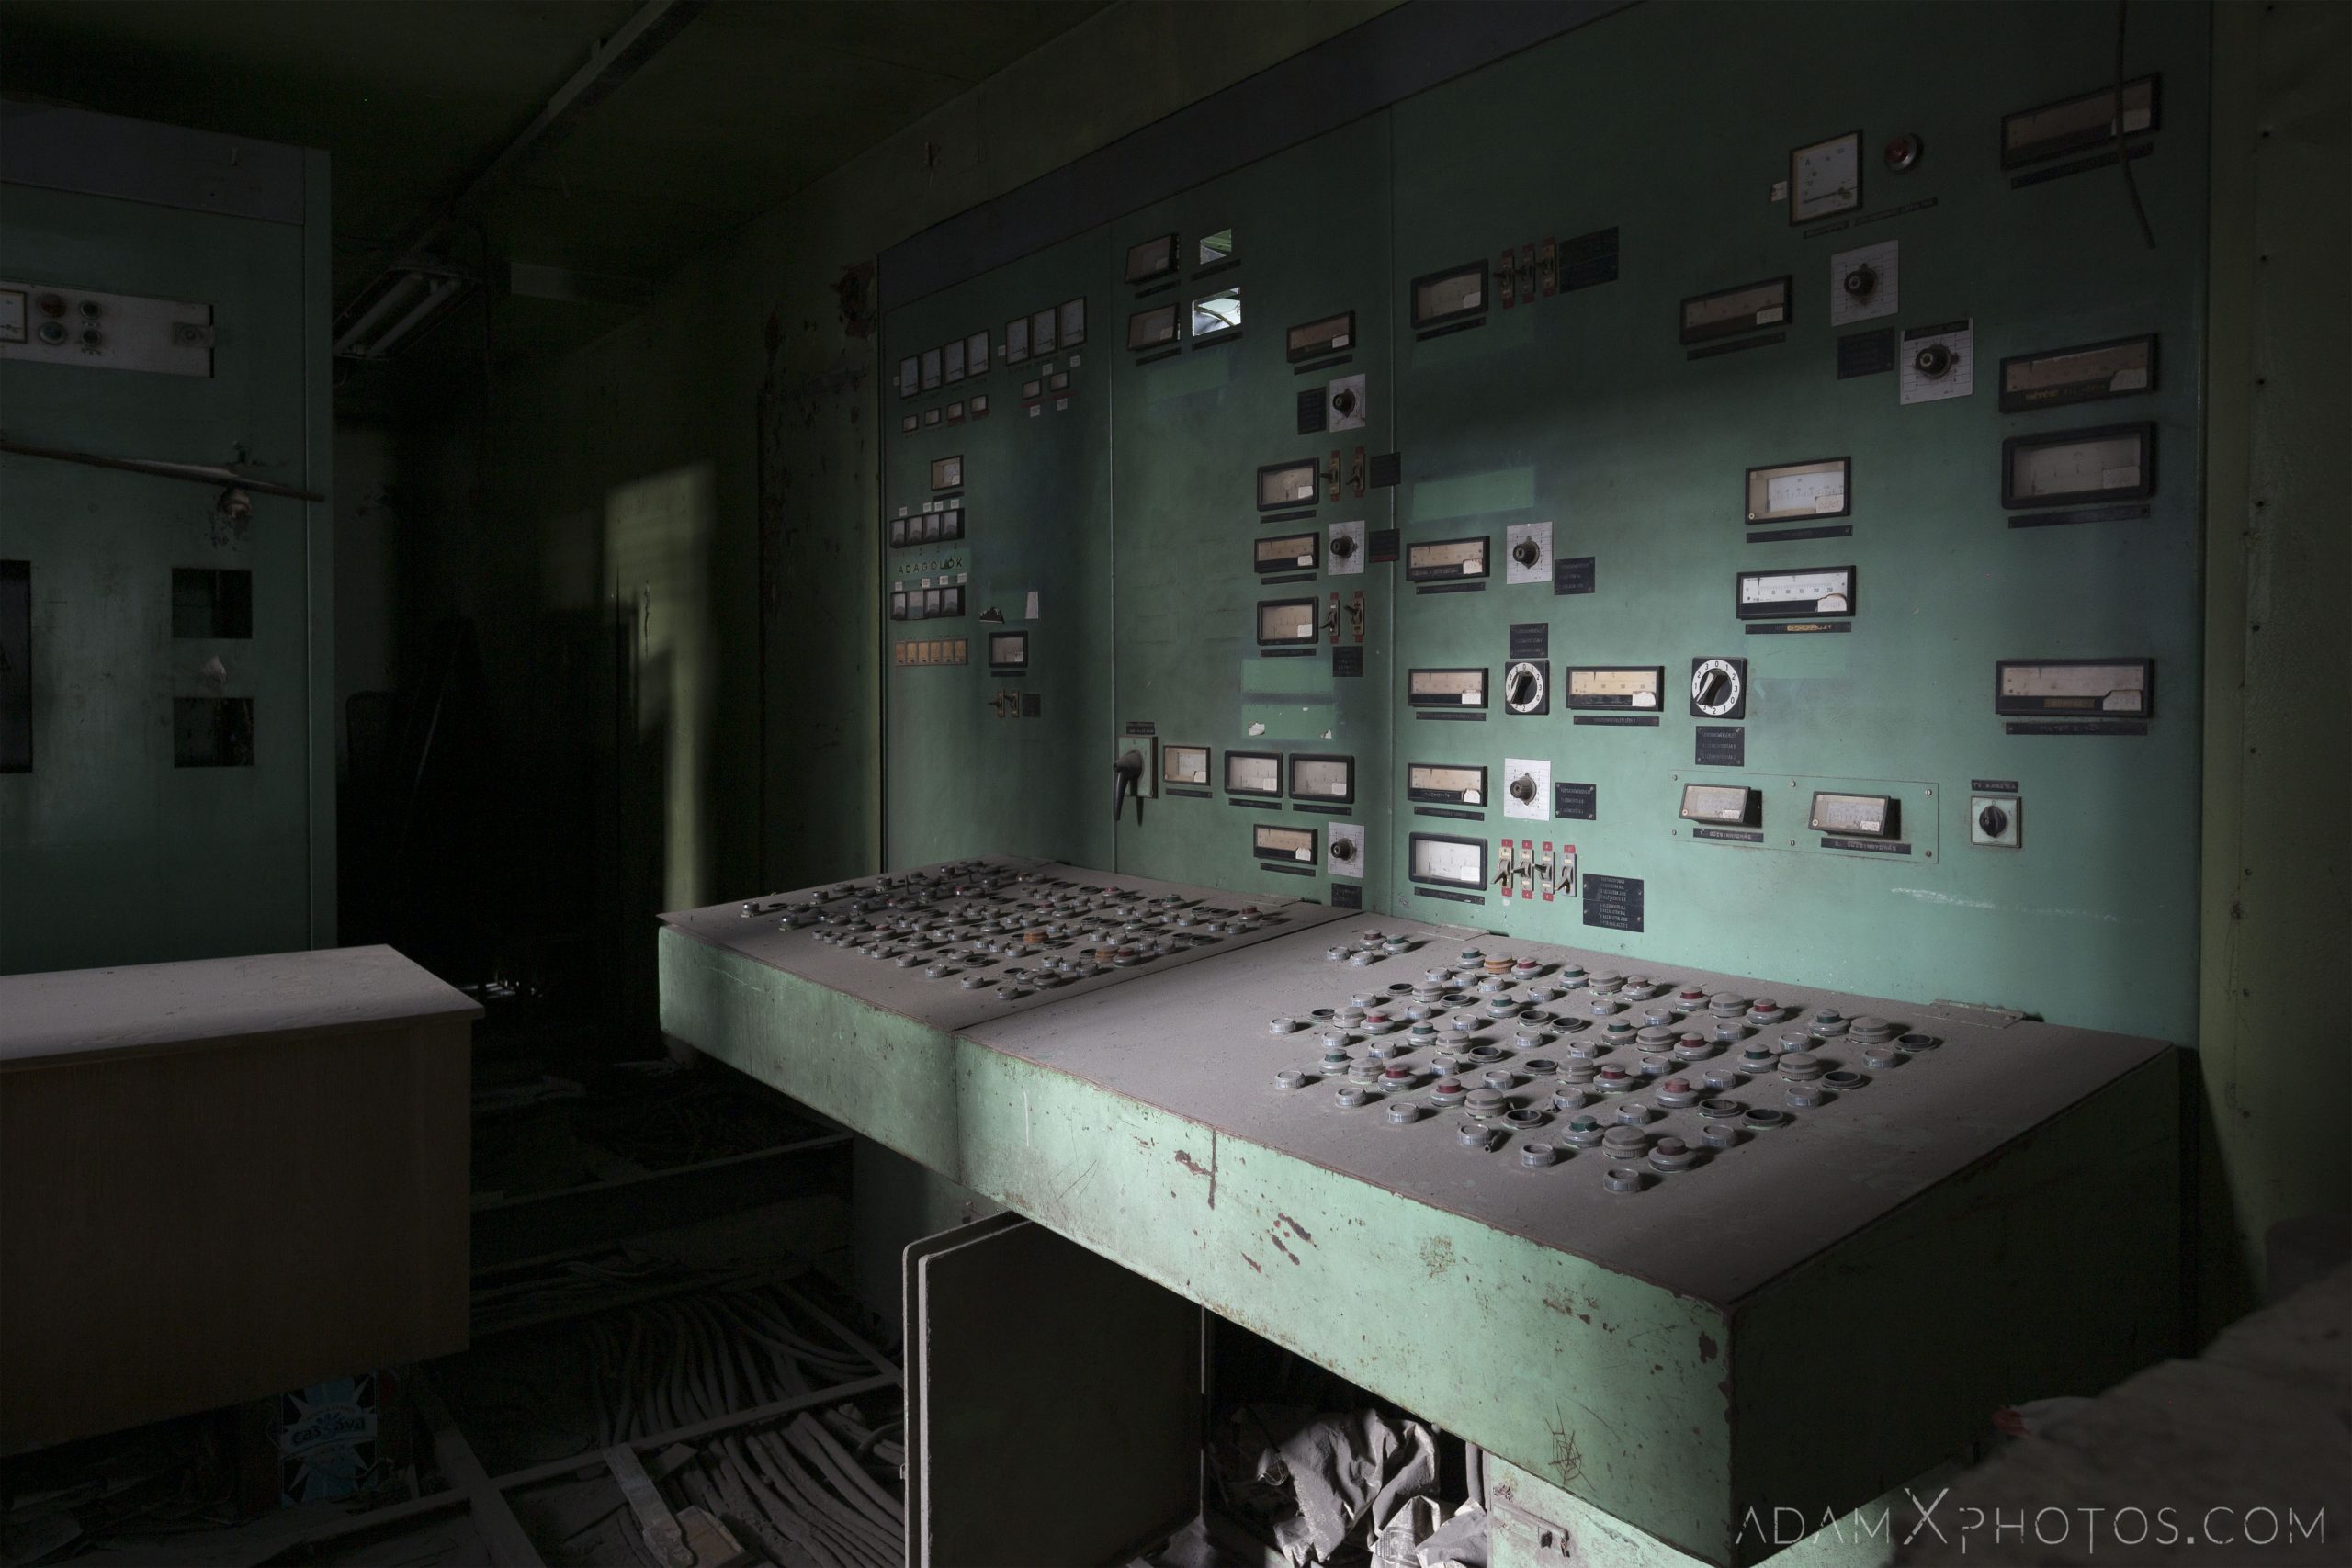 Green control panels industry industrial rusty rusting Bladerunner Blade Runner 2049 Powerplant Inota Shephard's Power Plant Hungary Adam X Urbex Urban Exploration Access 2018 Abandoned decay ruins lost forgotten derelict location creepy haunting eerie security